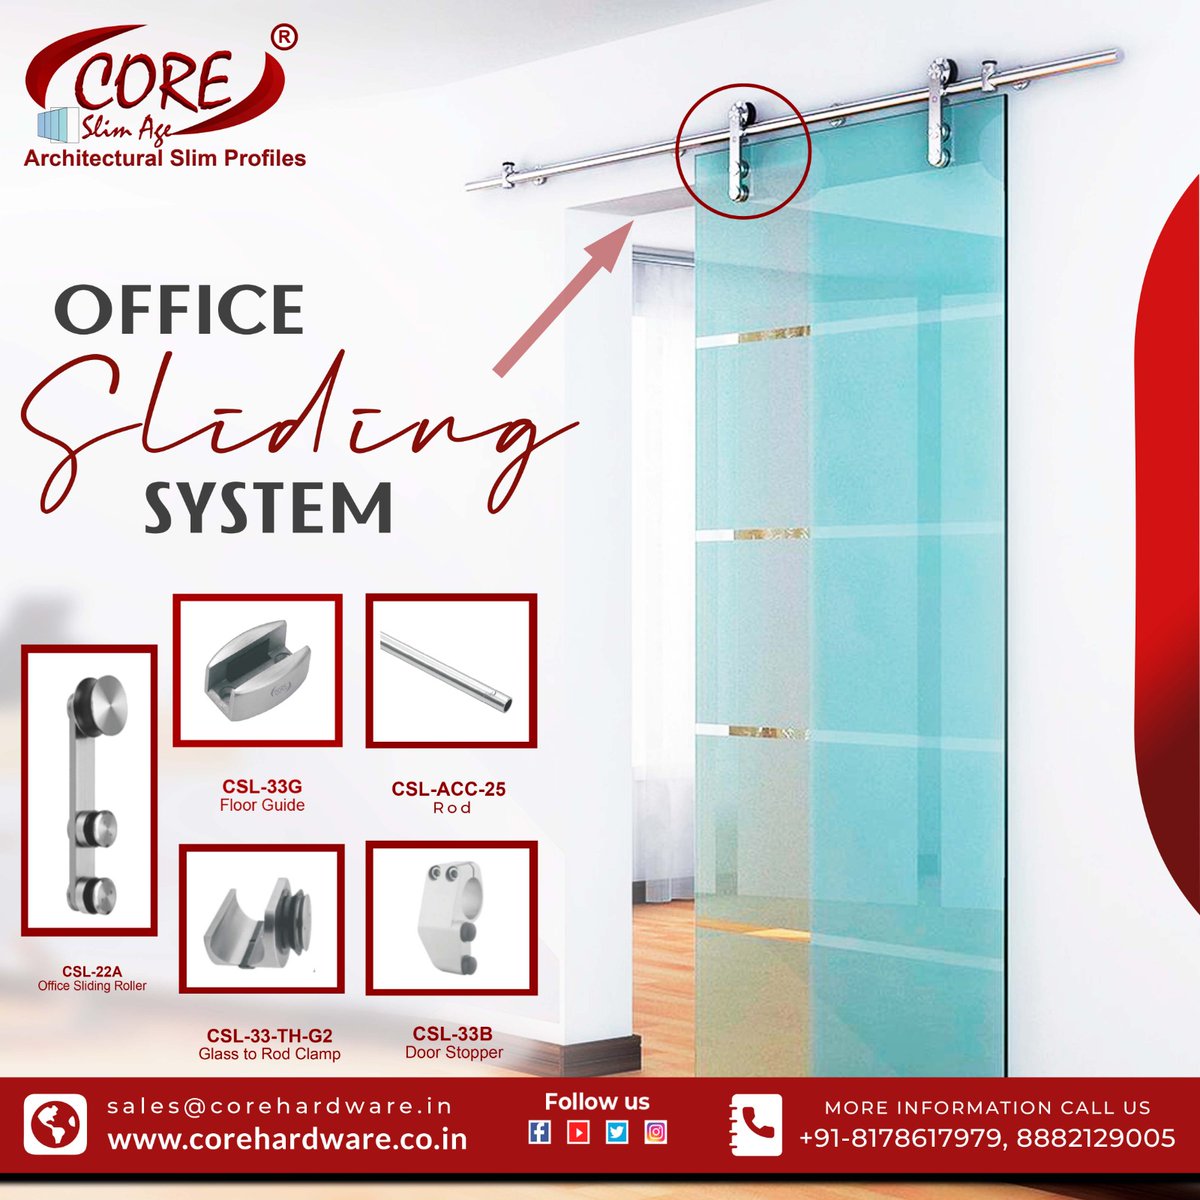 Go with Core's perfectly stylish and minimalist Office Sliding Door System for the complete-upgradation of your commercial space!

#OfficeDesign #OfficeSpace #SlidingDoors #InteriorDesign #OfficeRenovation #OfficeDecor #ModernOffice #OfficeStyle #coreglasshardware